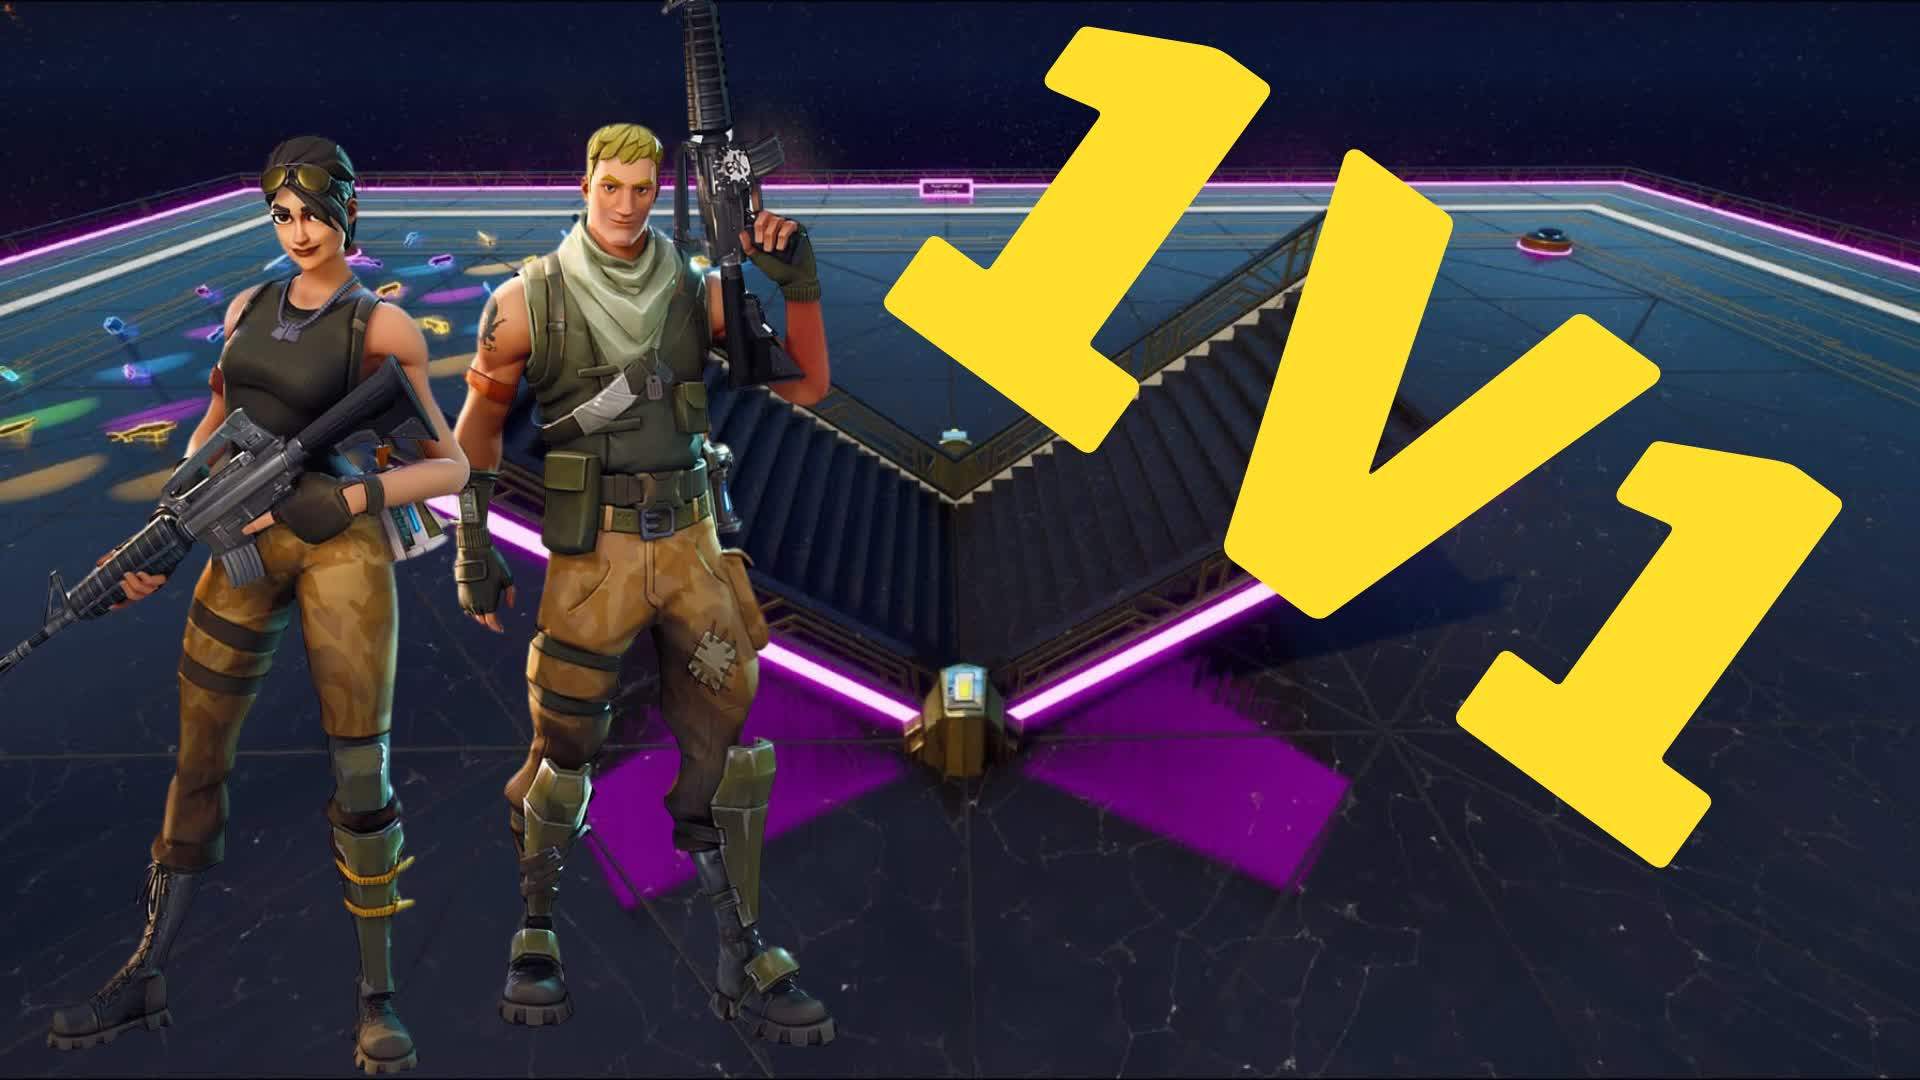 1v1 Build Fights With All Weapons!